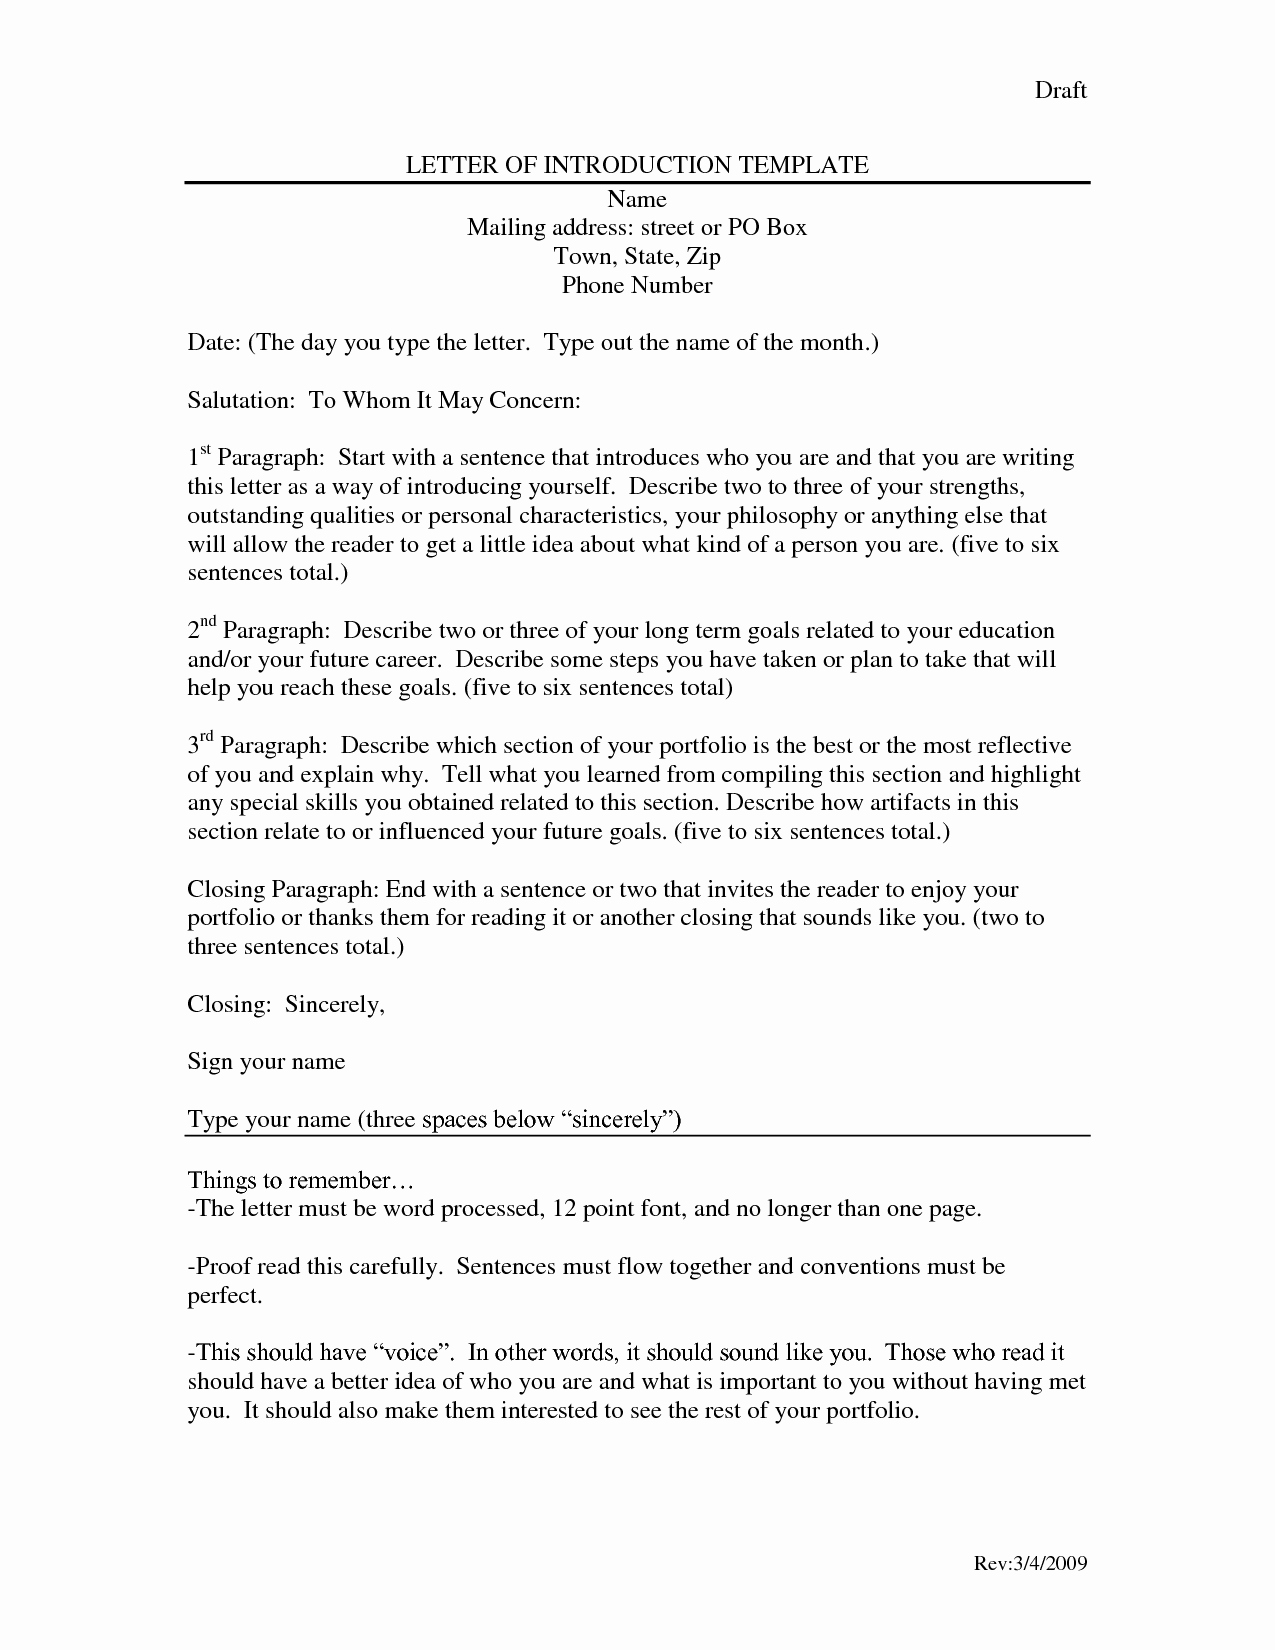 Self Introduction Letter Sample Inspirational Letter Introduction Template Dancingmermaid Yfzce92i